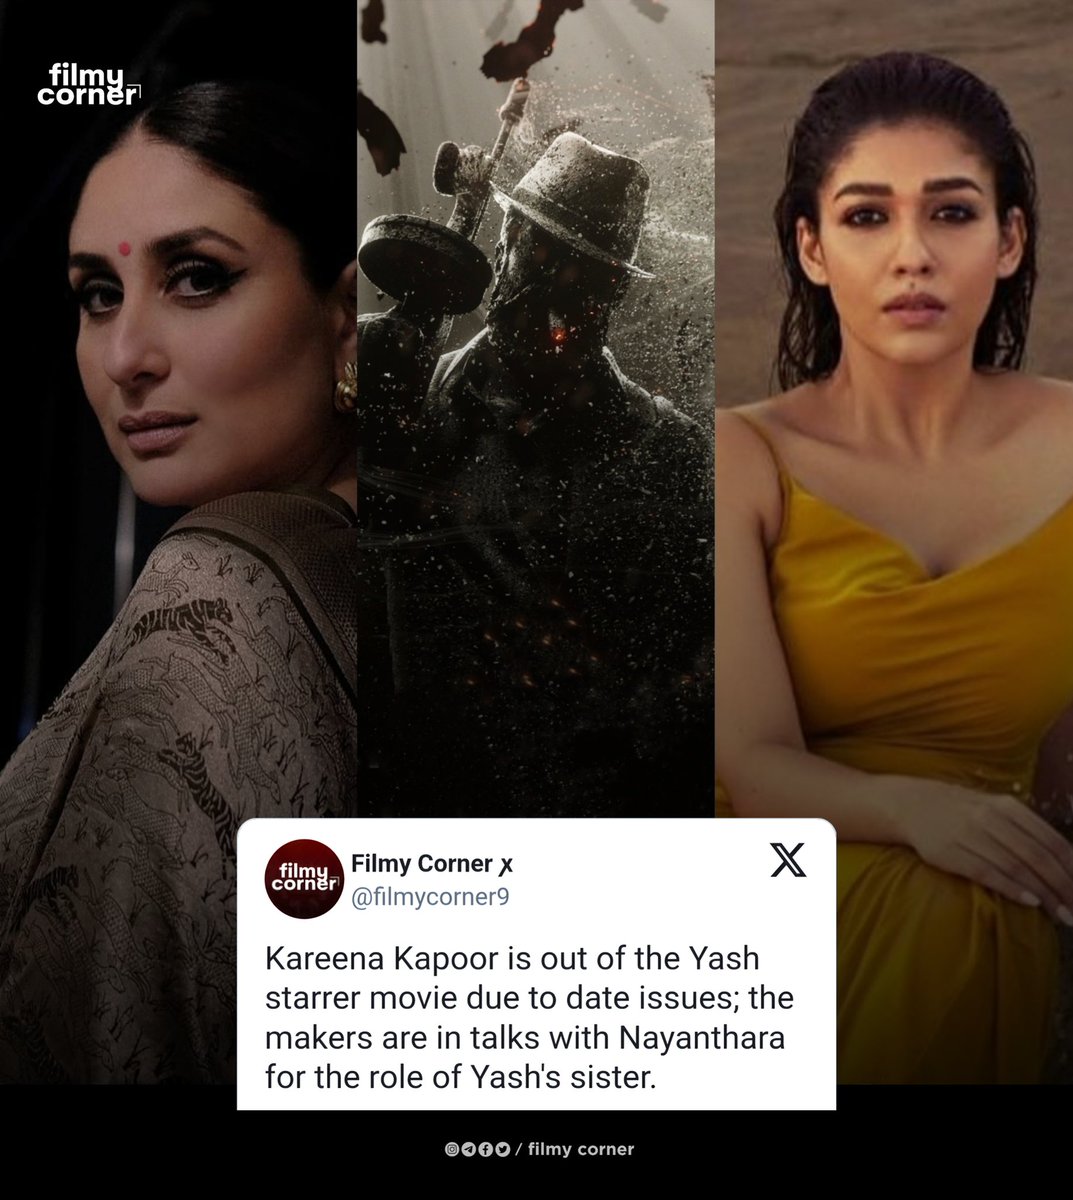 #KareenaKapoor is our of  Yash Toxic Movie. due to date issue; Makers in Talks with #Nayanthara for #Yash Sister Role.

#Toxic #Yash19